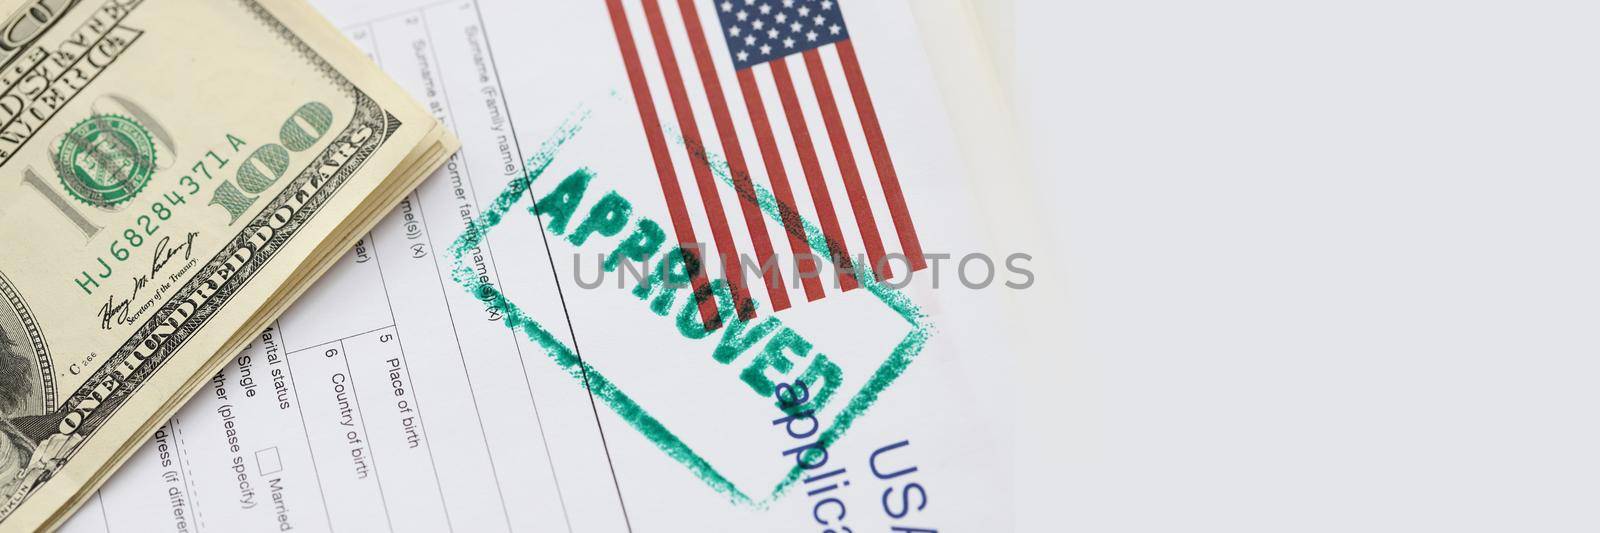 Stamp approved is on documents for obtaining American visa closeup. Permission to travel to united states of america concept